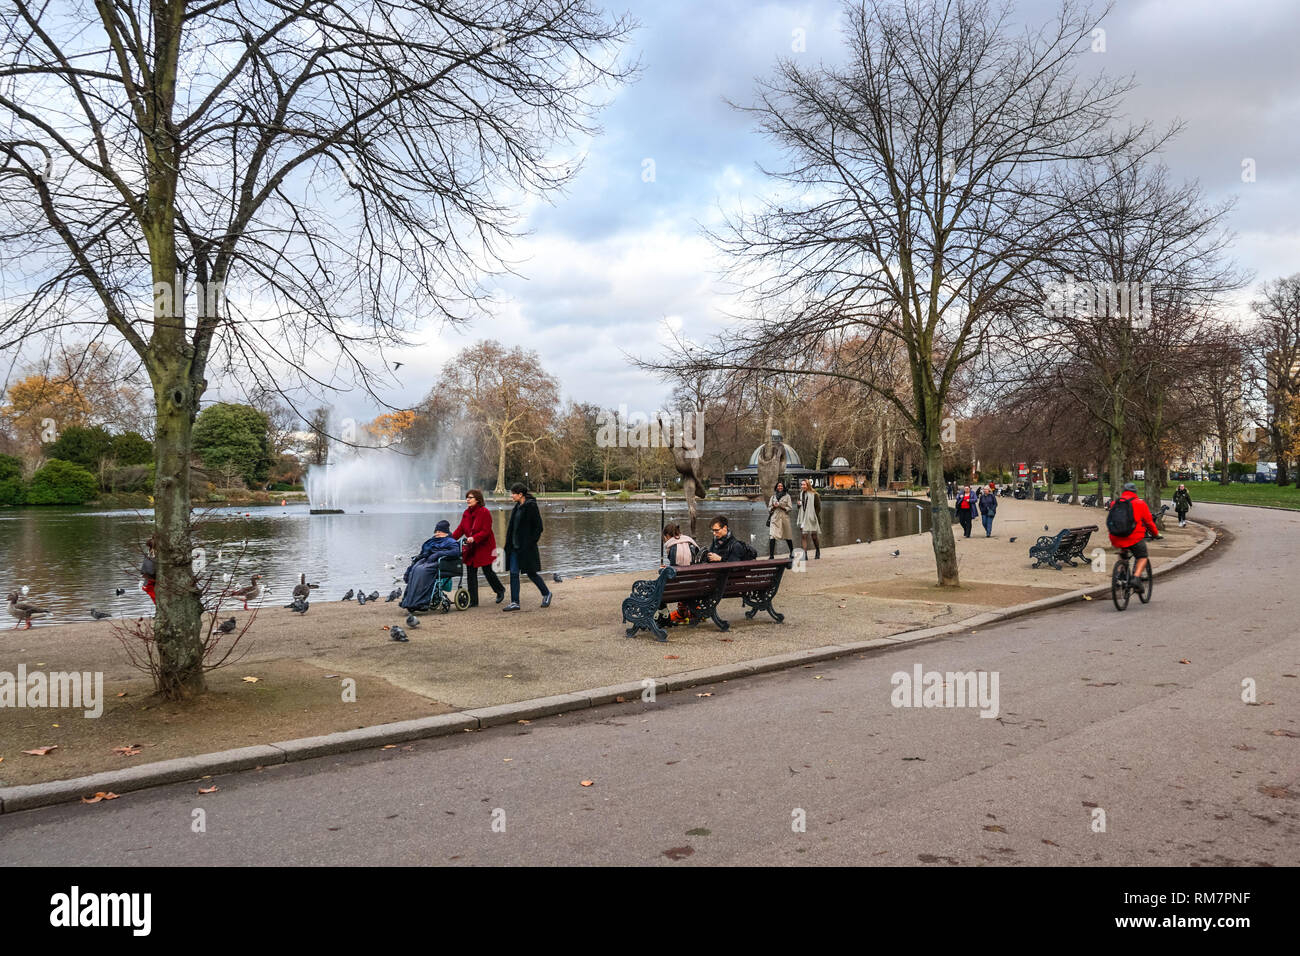 People in Victoria Park during winter, London England United Kingdom UK Stock Photo